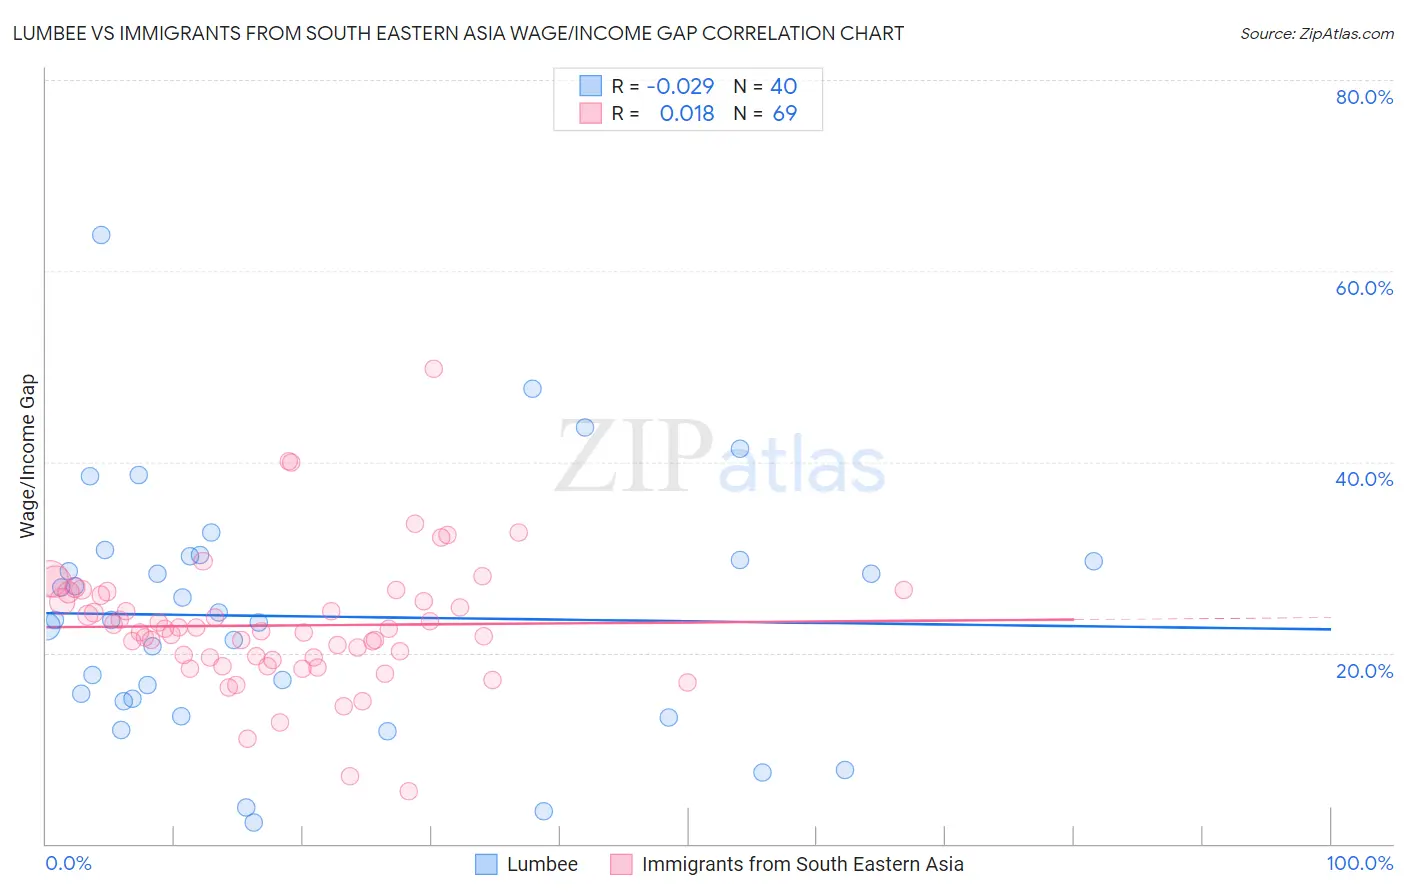 Lumbee vs Immigrants from South Eastern Asia Wage/Income Gap